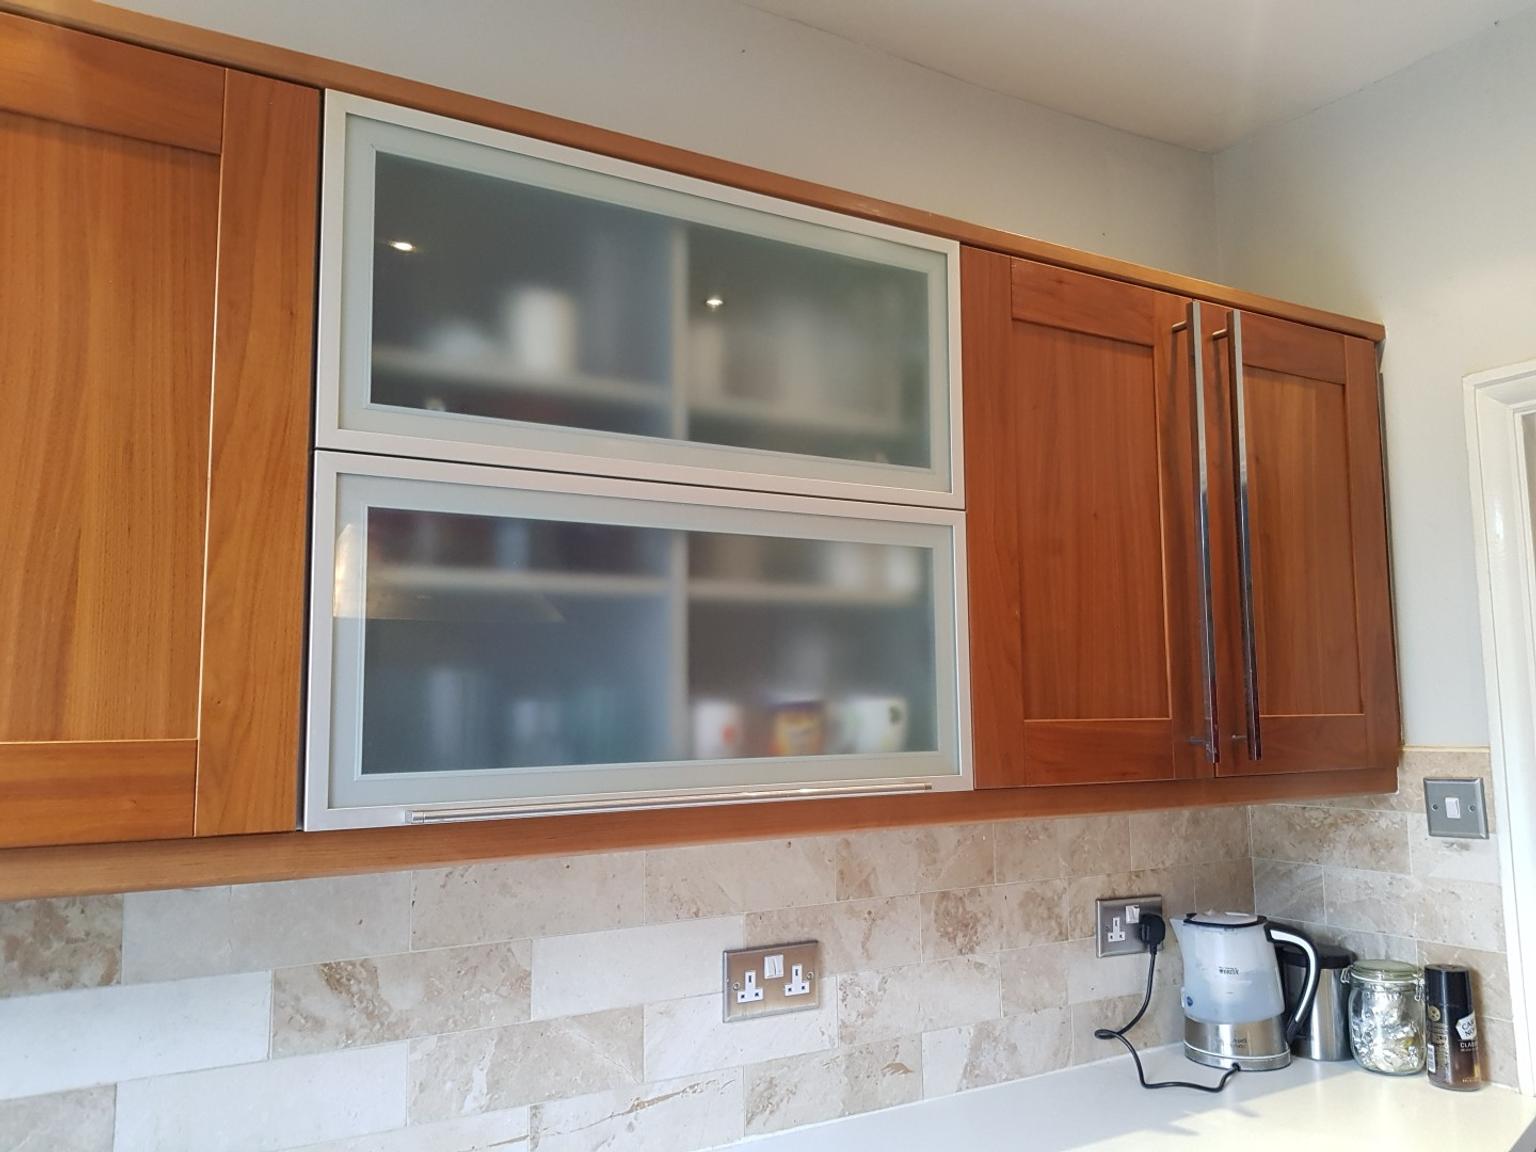 Crown Imperial Kitchen Units In Ig11 London Borough Of Redbridge